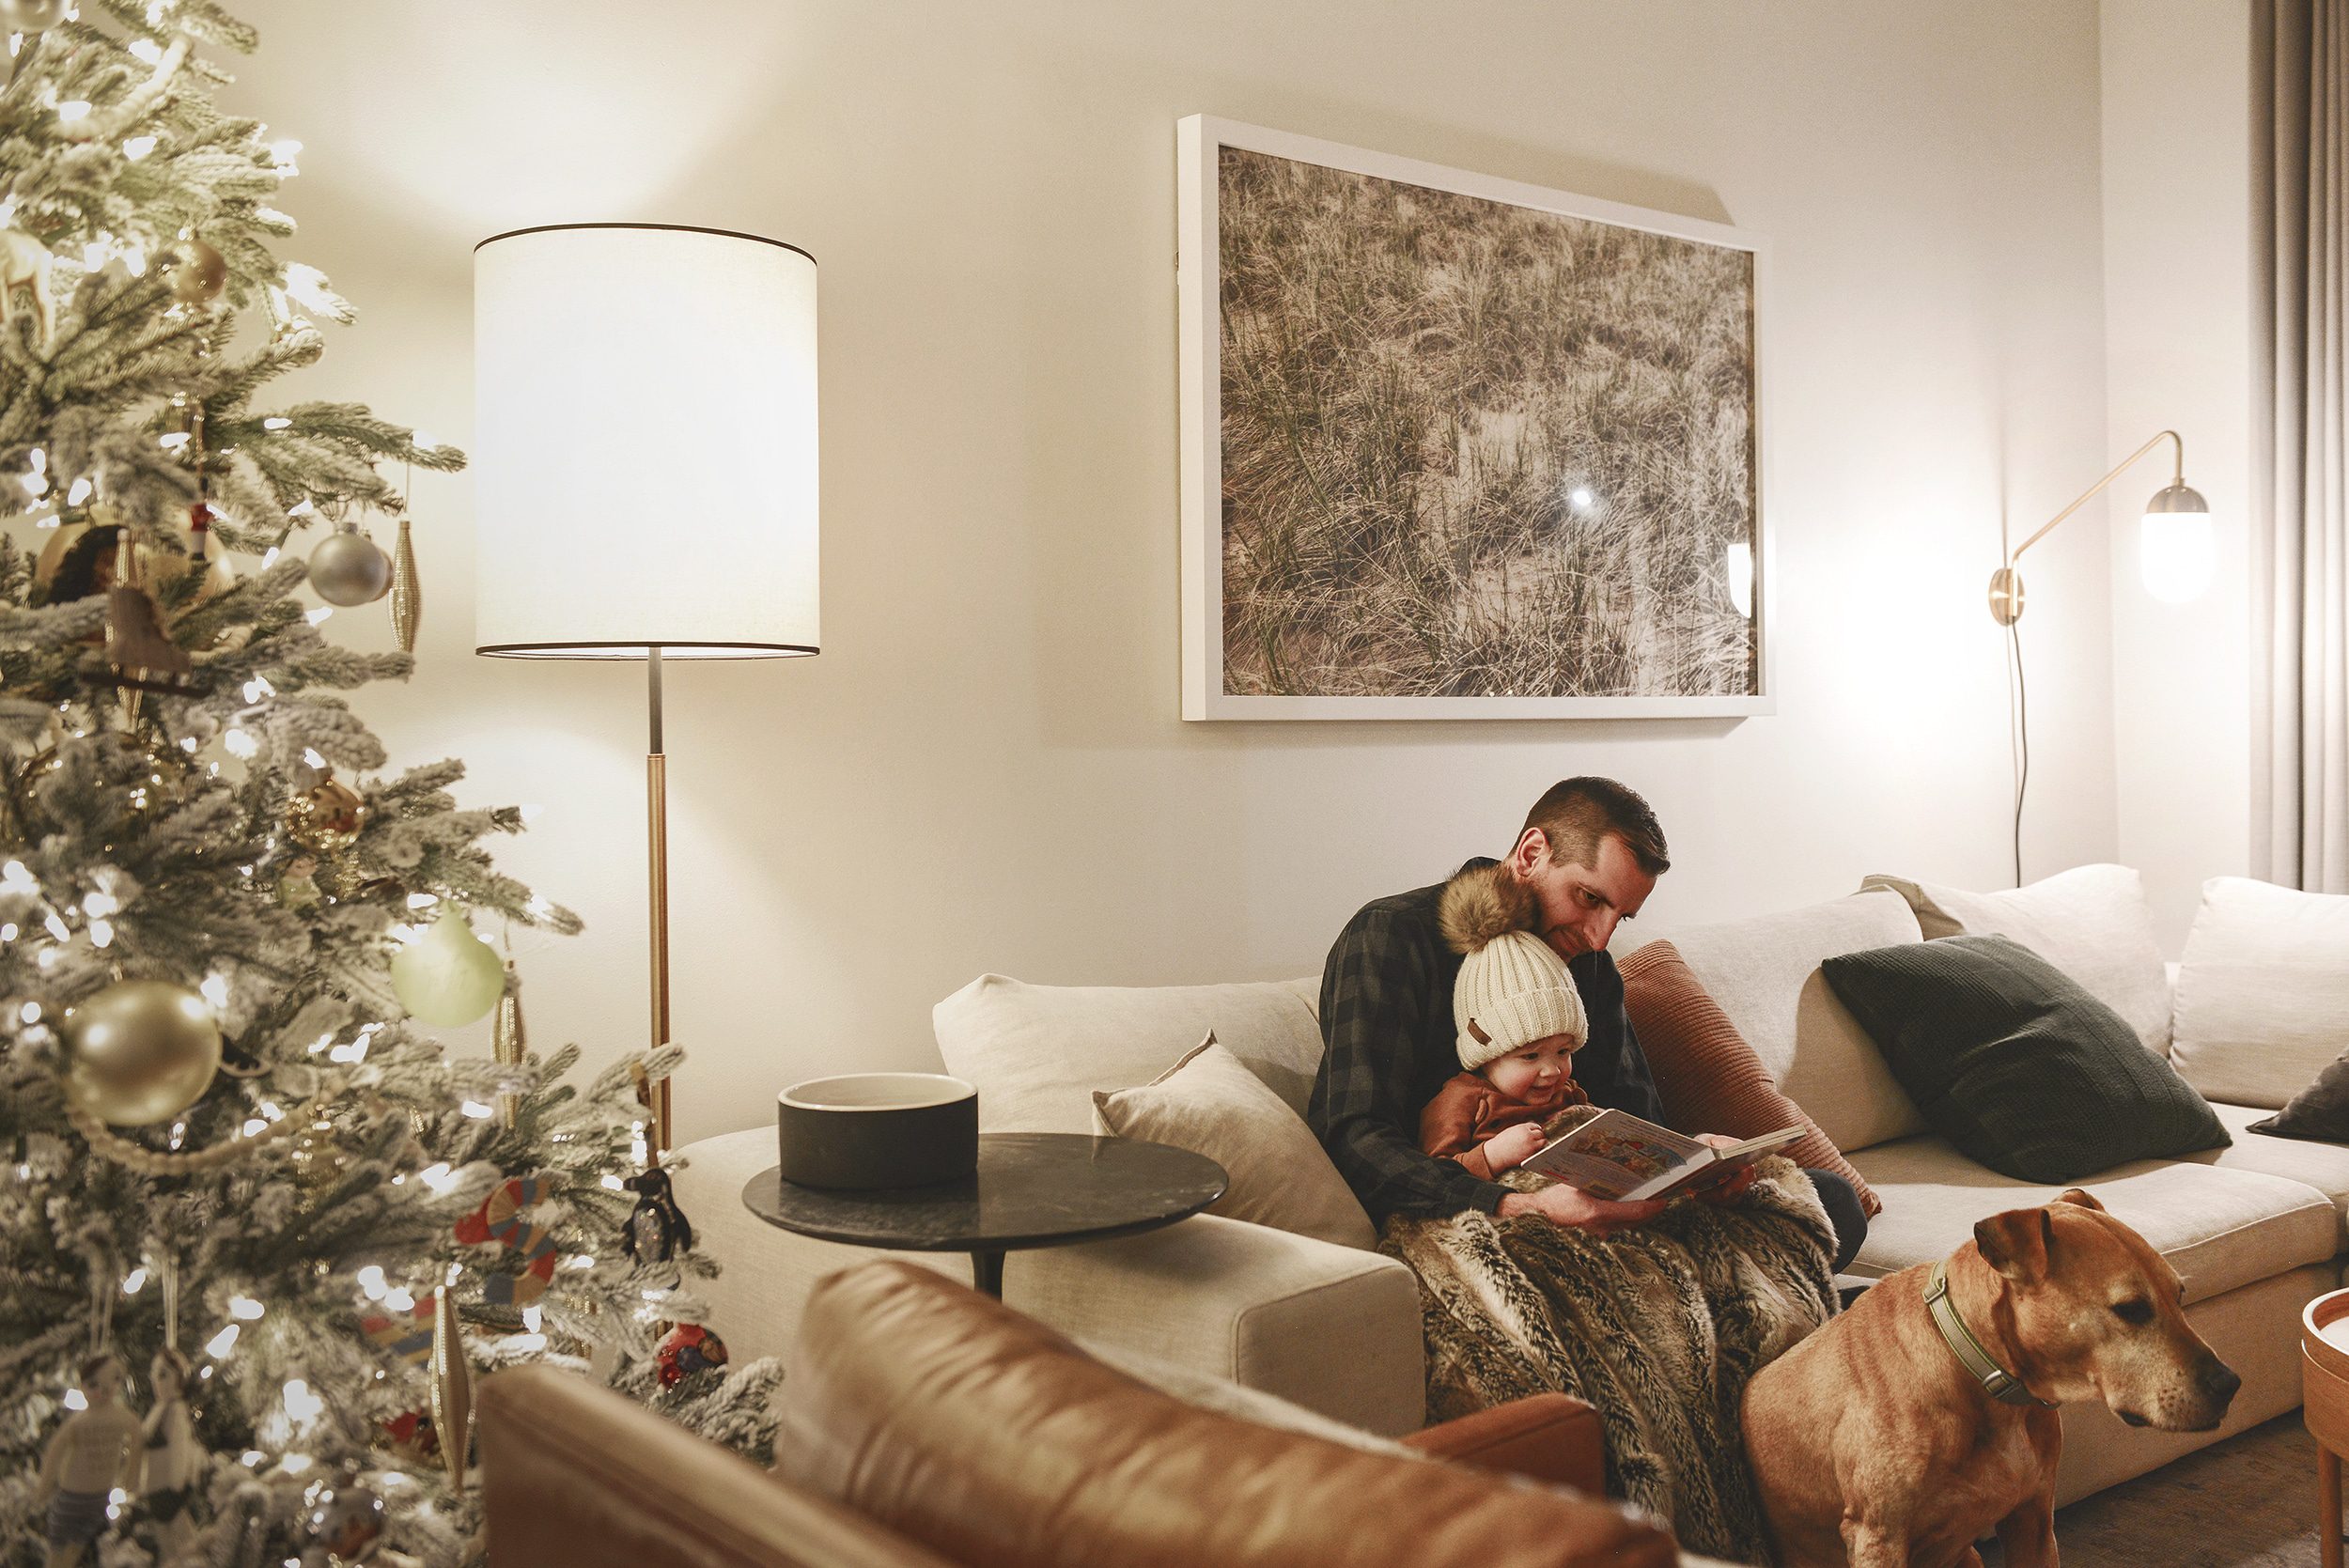 Scott reads Lucy a book with Jack by their side and a Christmas tree in the foreground | Our holiday home tour - at night! via Yellow Brick Home